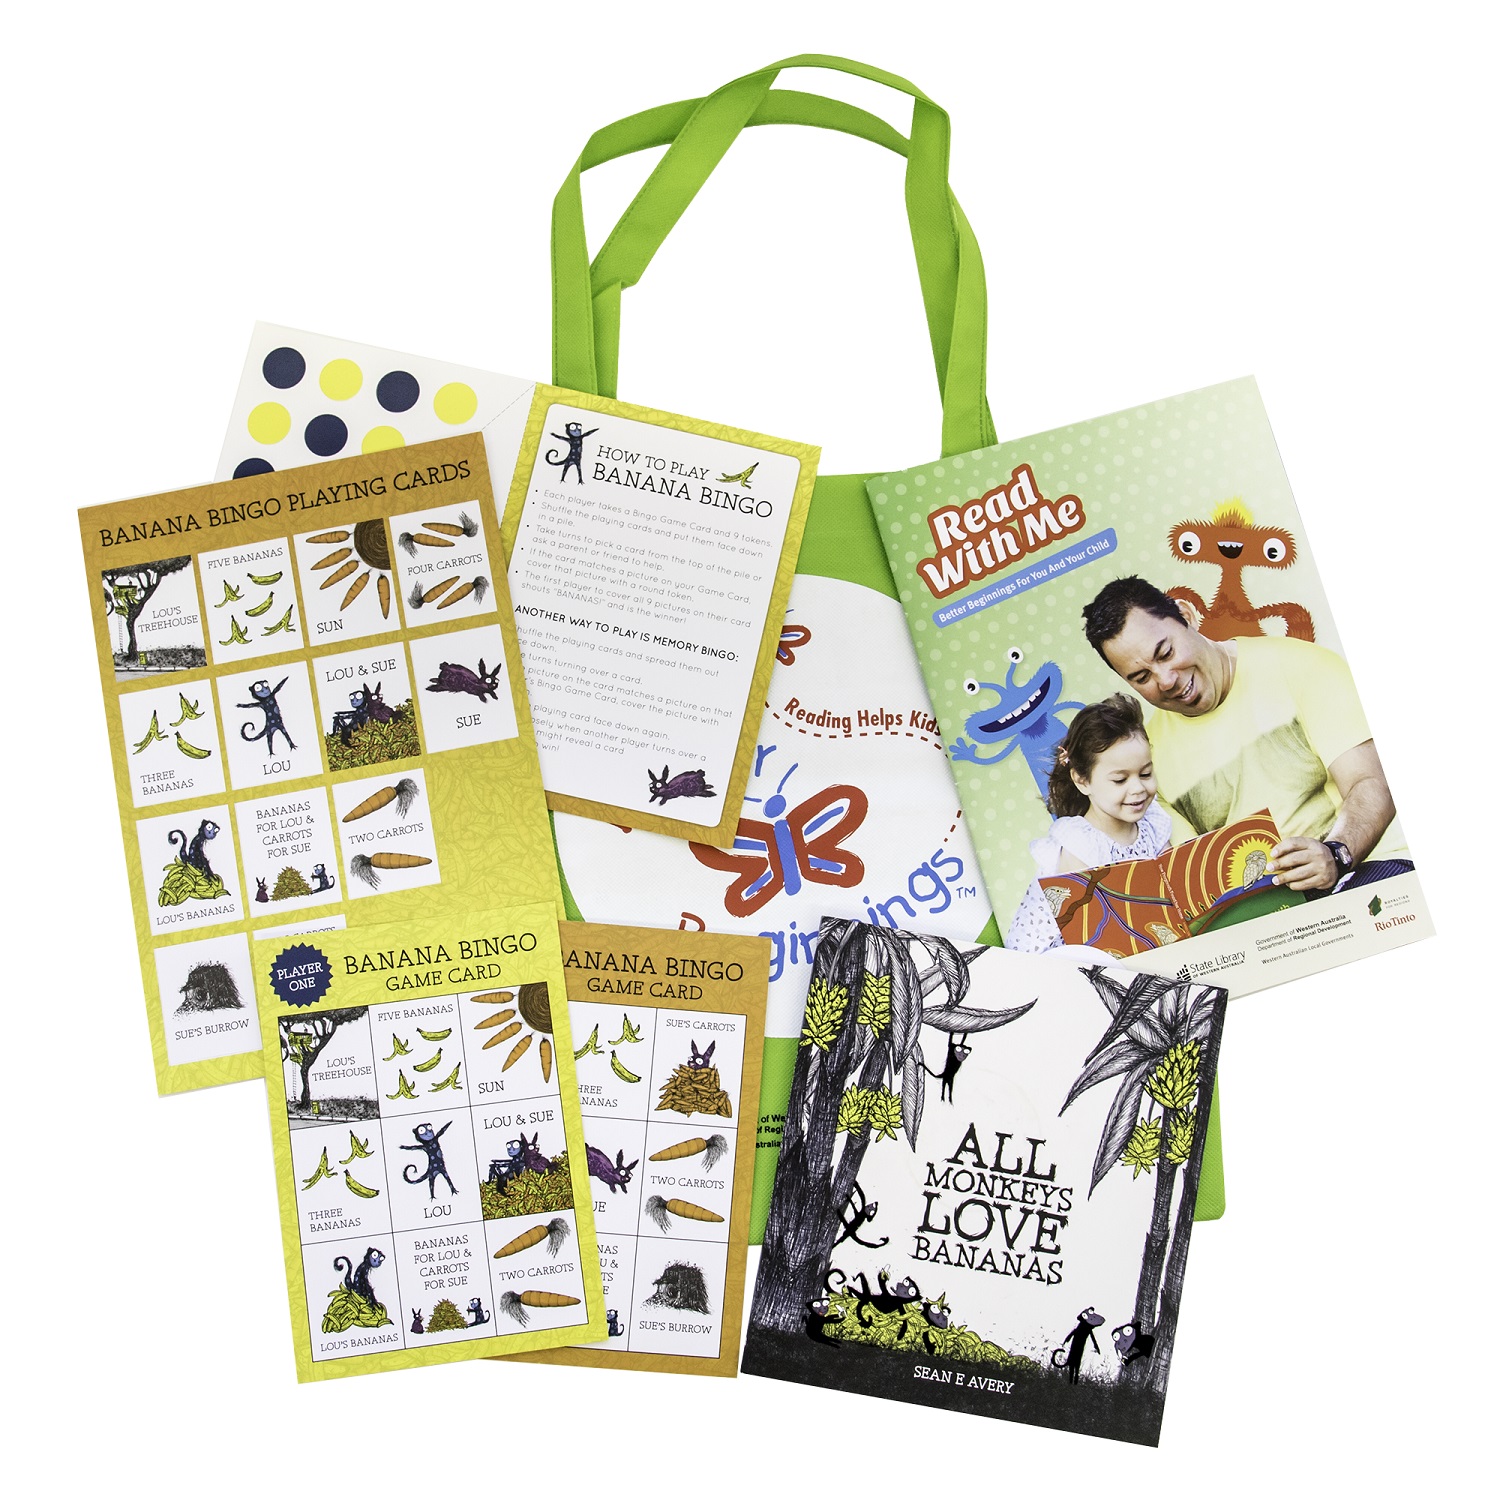 Green Kindergarten pack with Read With Me Brochure, All Monkeys Love Bananas picture book with board games and activities based on the picture book